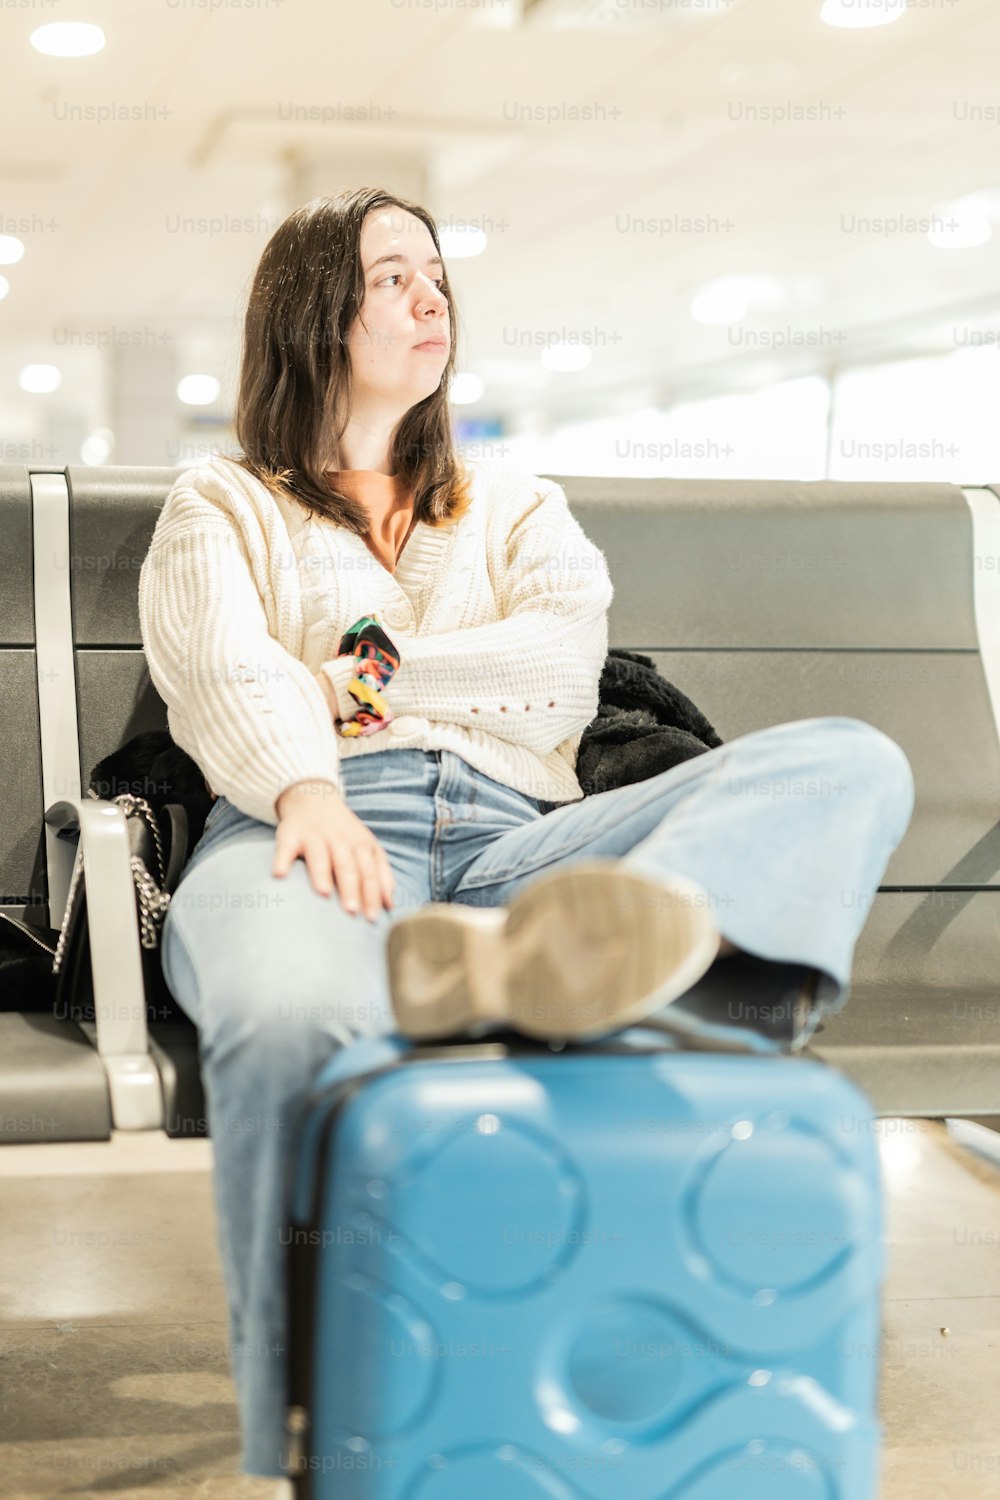 a woman sitting on a bench next to a blue suitcase